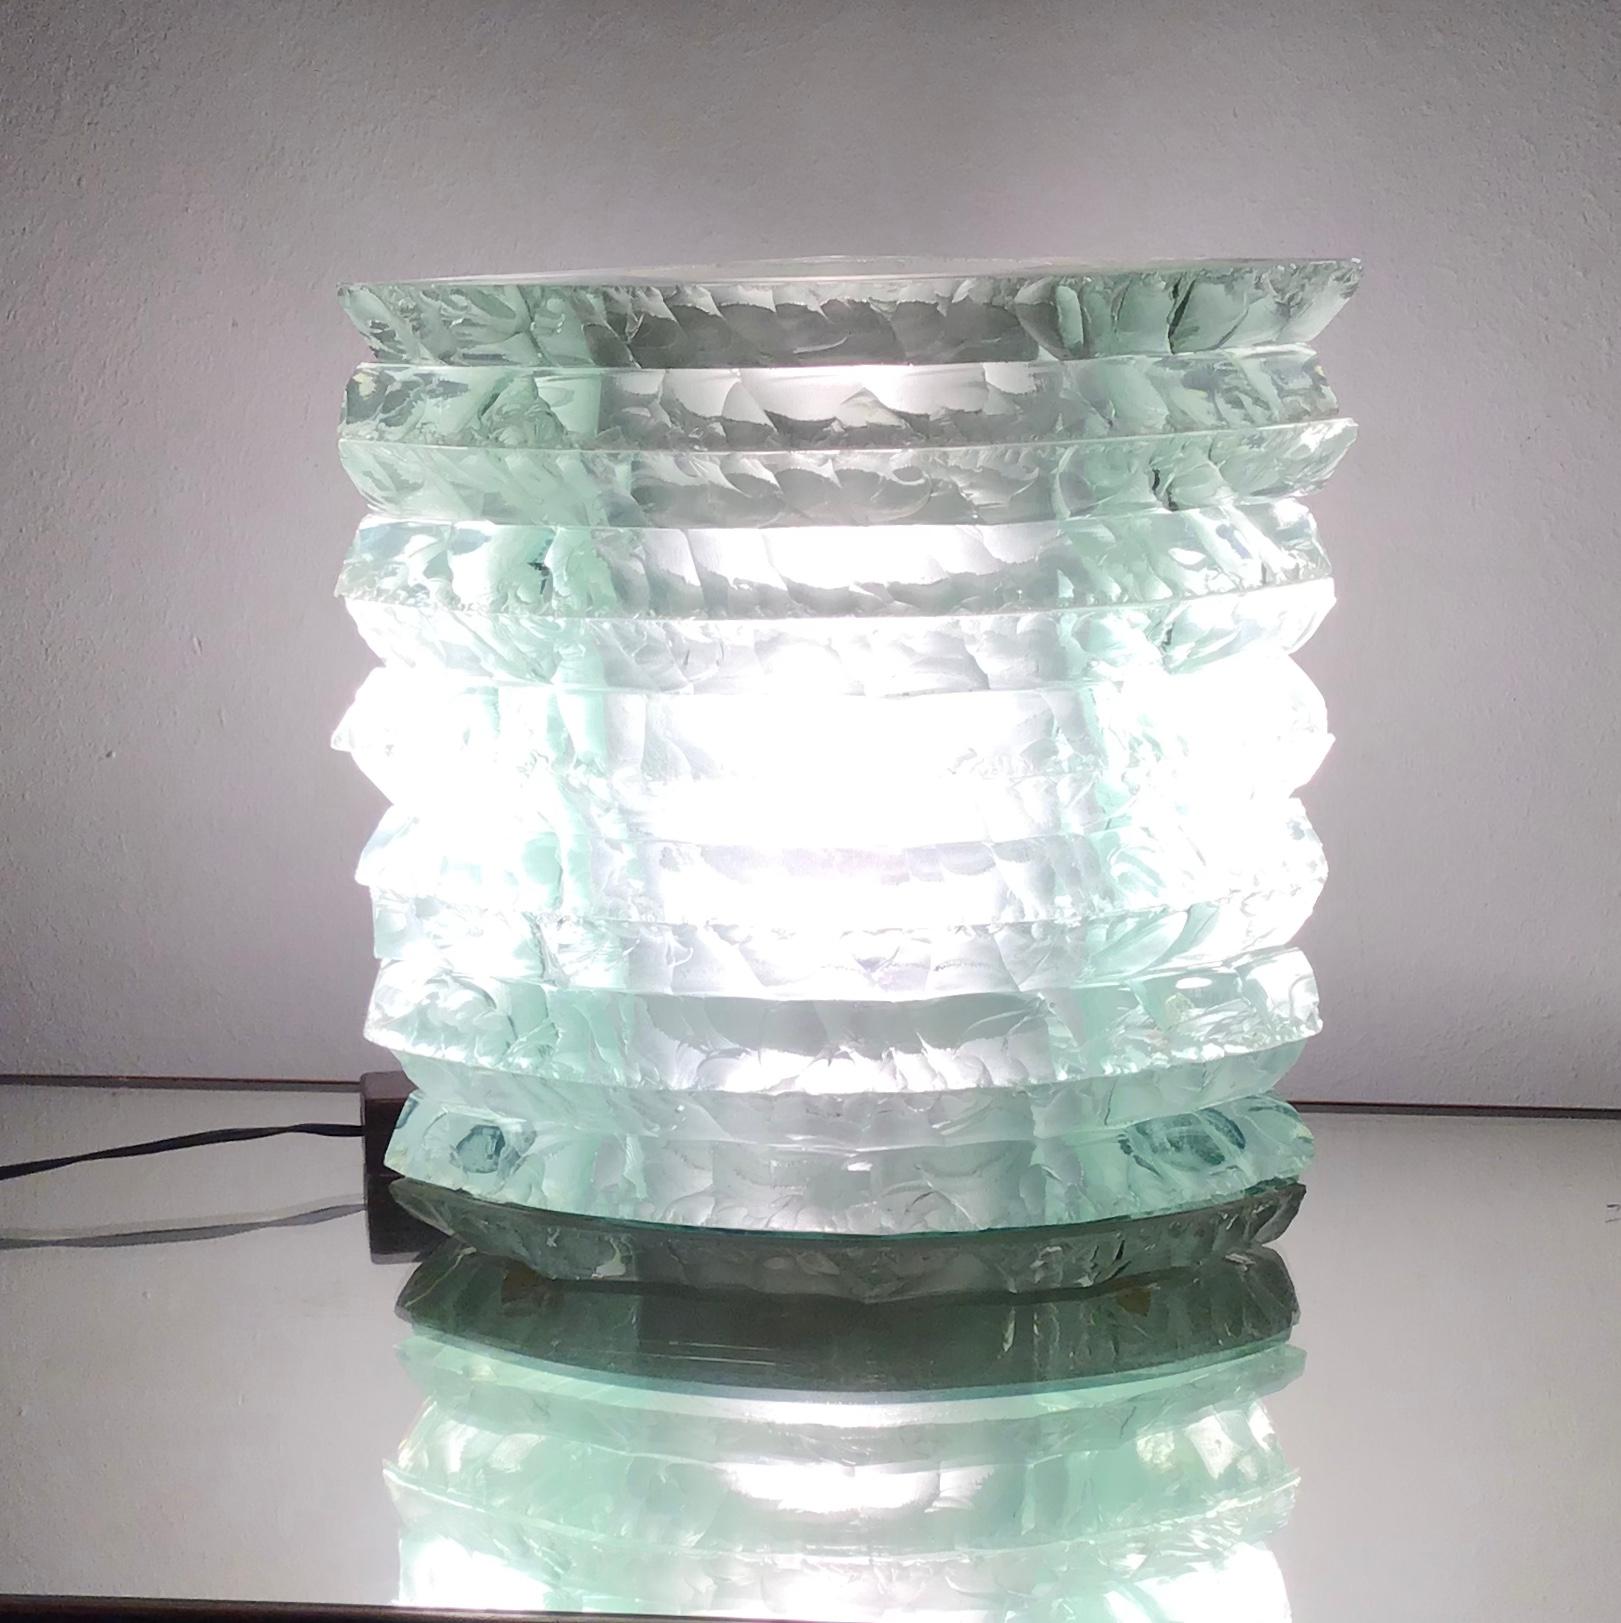 Cristal art table lamp glass, 1950, Italy.